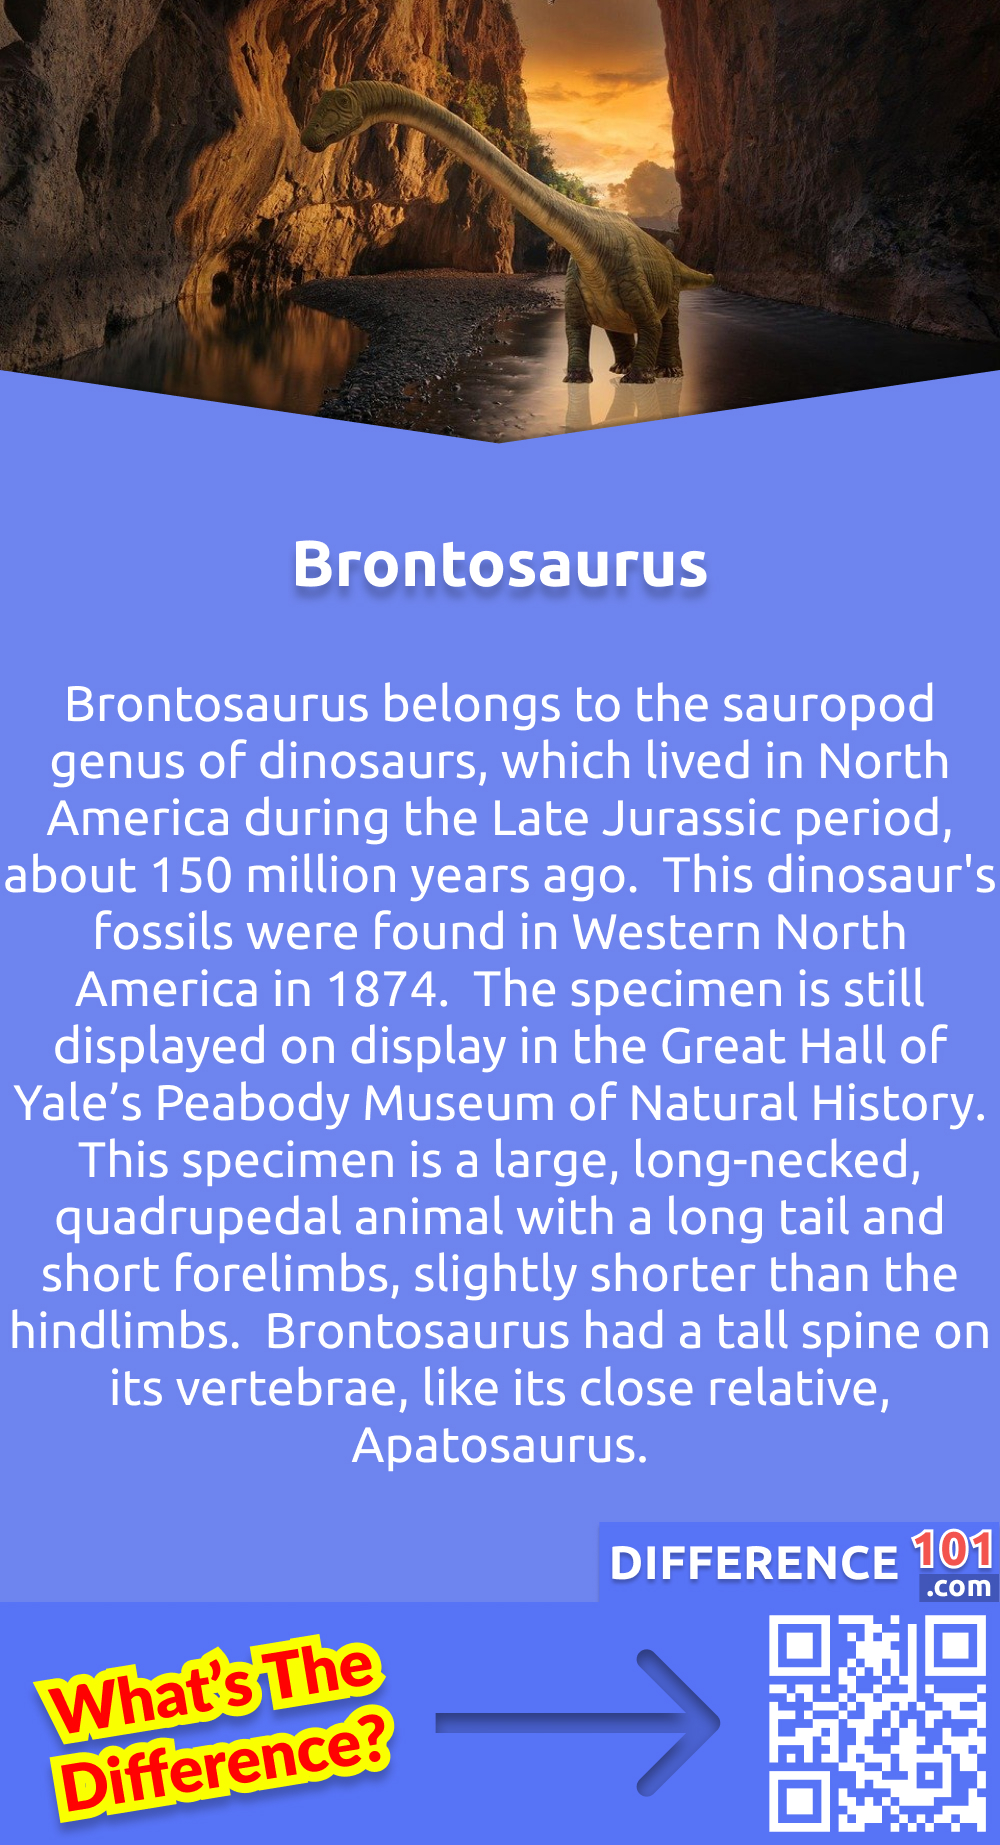 What Is Brontosaurus? Brontosaurus belongs to the sauropod genus of dinosaurs, which lived in North America during the Late Jurassic period, about 150 million years ago.  This dinosaur's fossils were found in Western North America in 1874.  The specimen is still displayed on display in the Great Hall of Yale’s Peabody Museum of Natural History. This specimen is a large, long-necked, quadrupedal animal with a long tail and short forelimbs, slightly shorter than the hindlimbs.  Brontosaurus had a tall spine on its vertebrae, like its close relative, Apatosaurus. Brontosaurus is a well-known dinosaur to be featured in films,  postage stamps, advertising, and many other media types. 